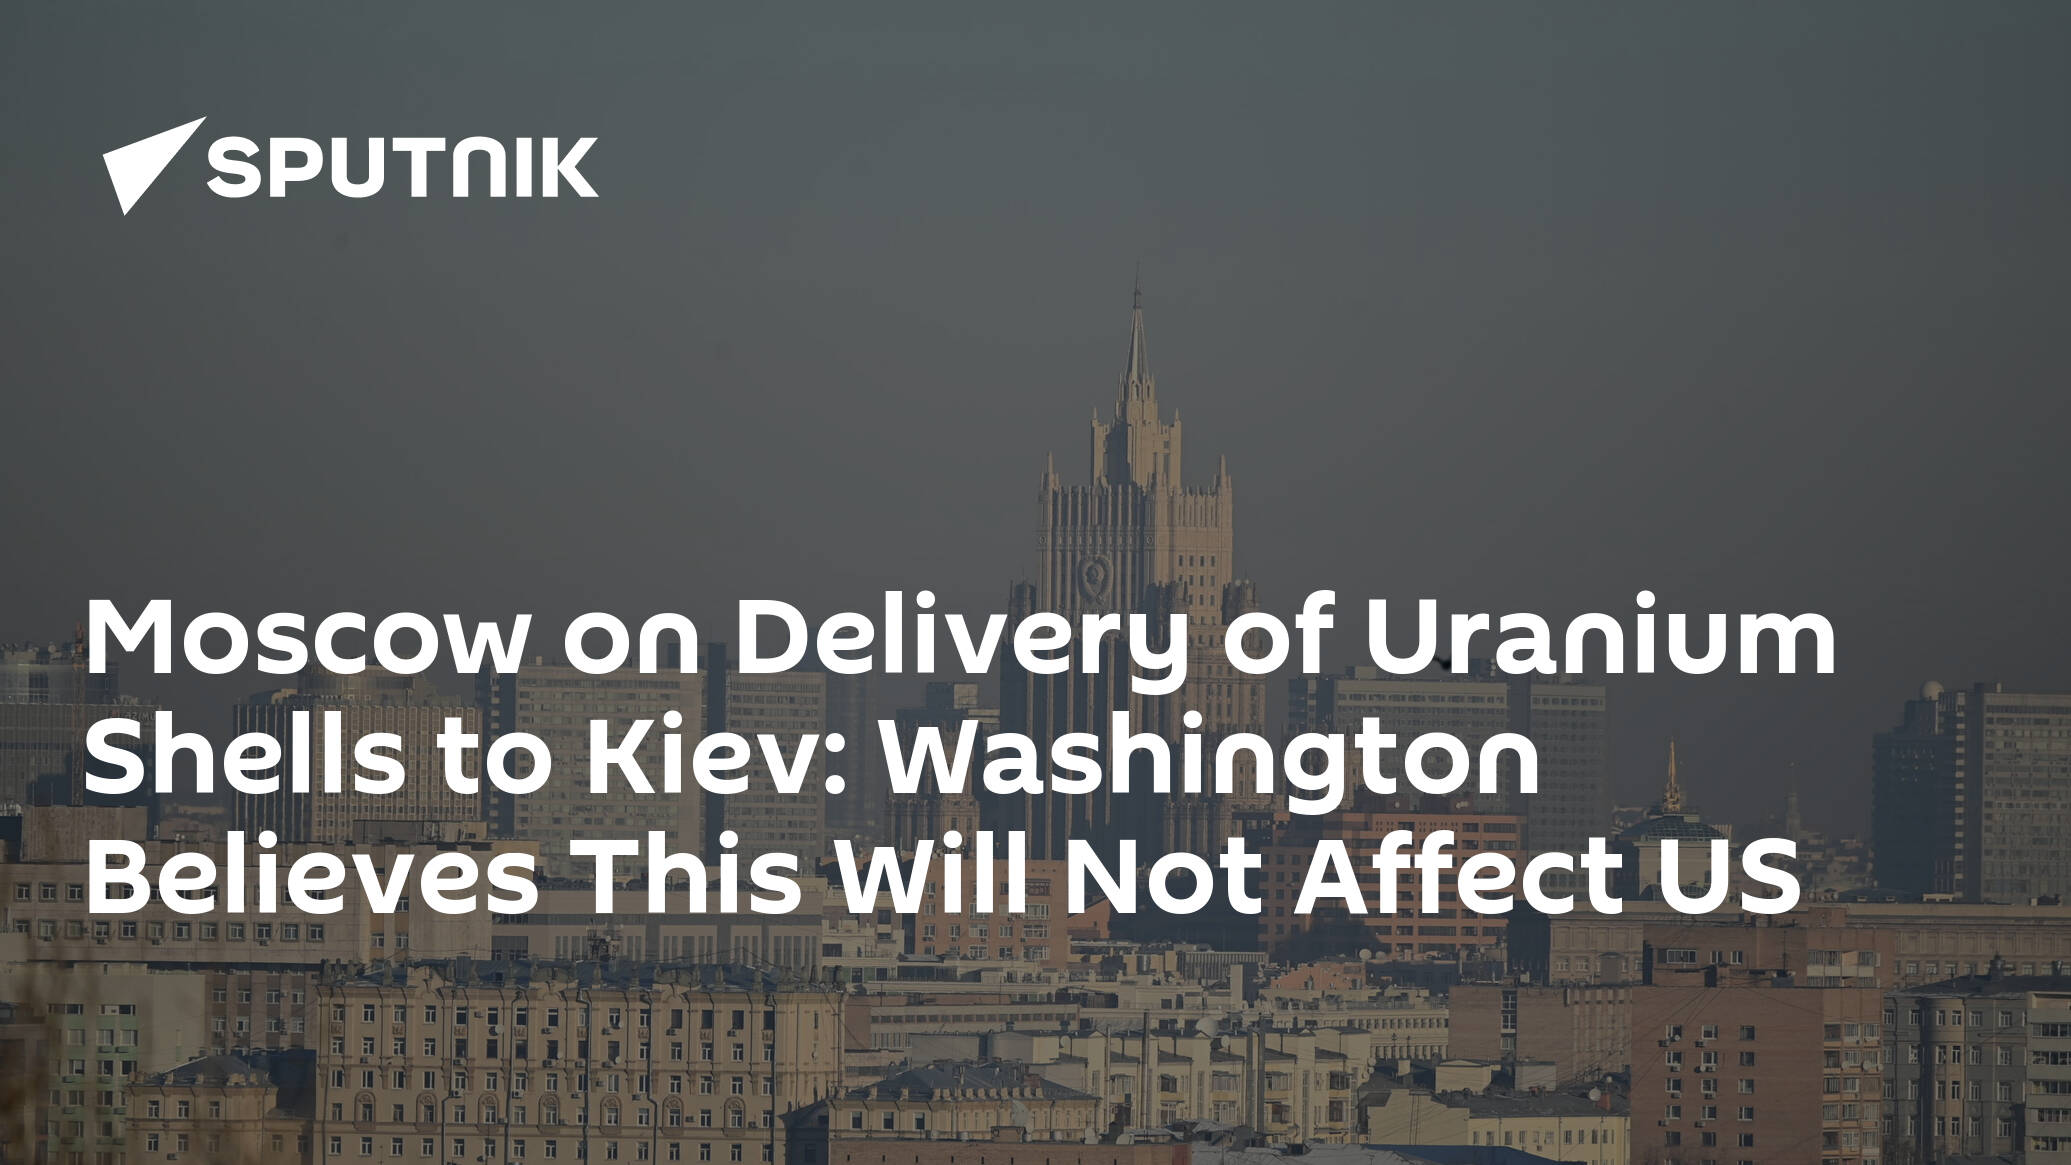 Moscow on Delivery of Uranium Shells to Kiev: Washington Believes This Will Not Affect US